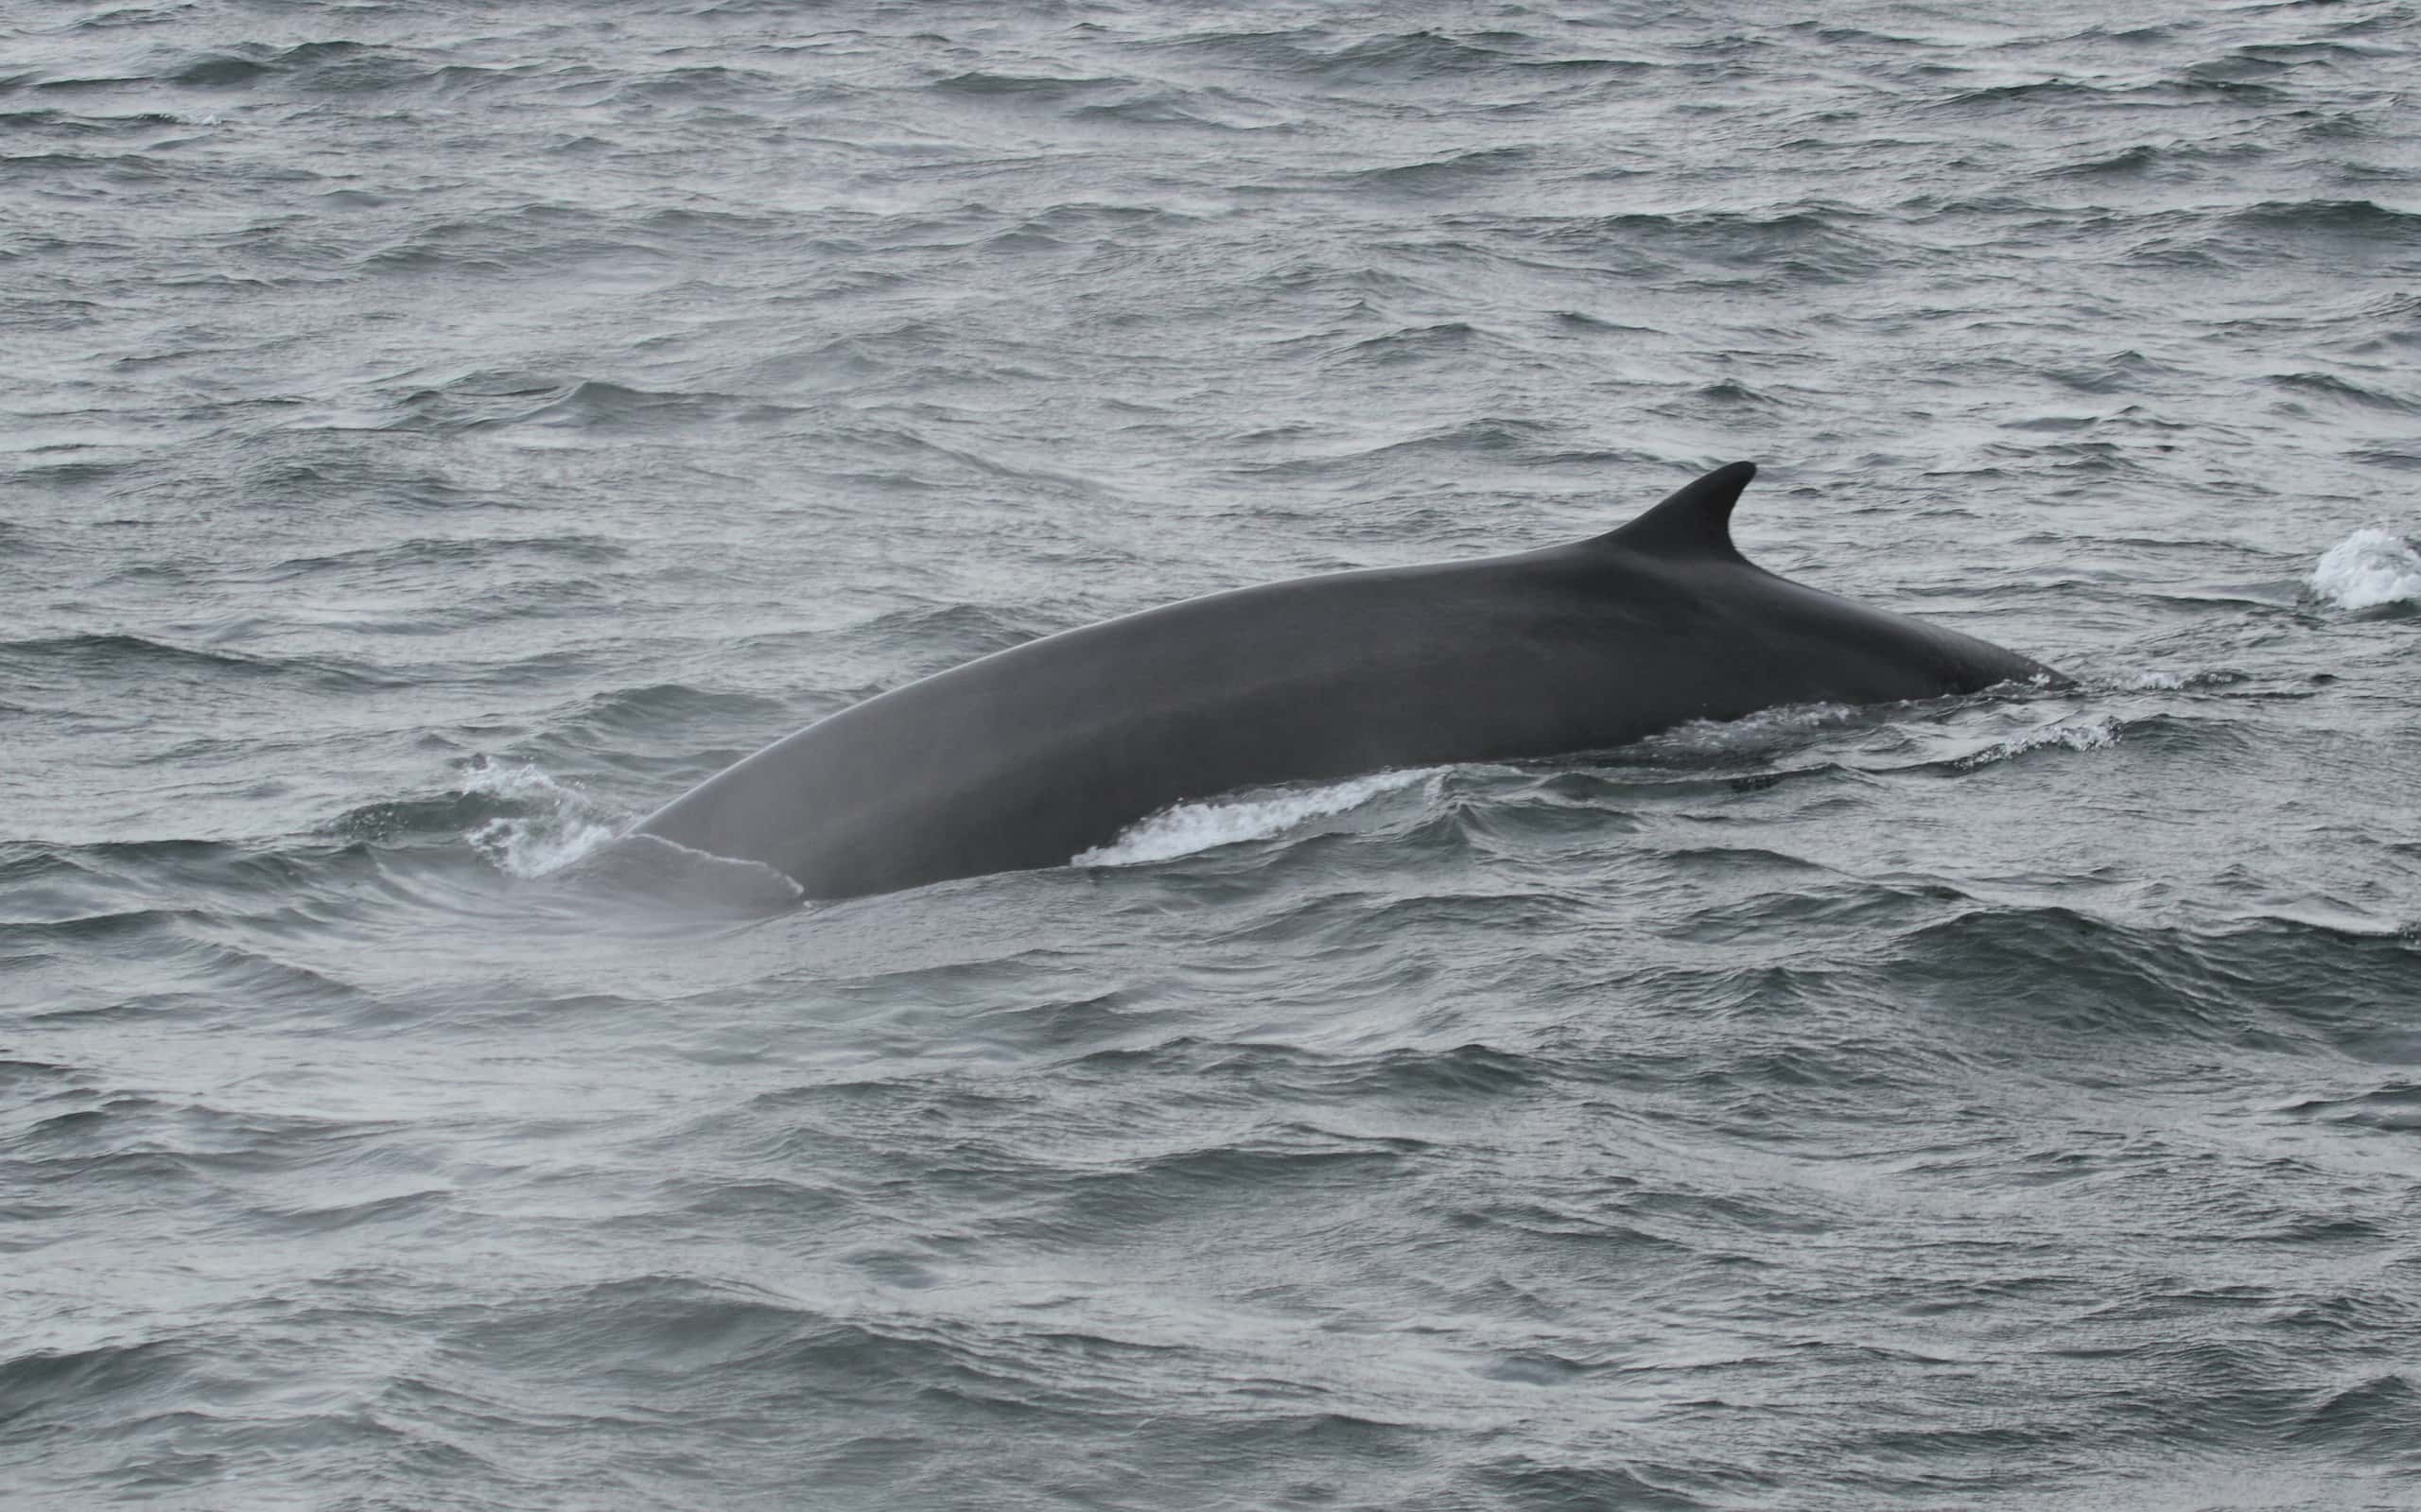 Fin whale, Saguenay–St. Lawrence Marine Park, Quebec, Canada